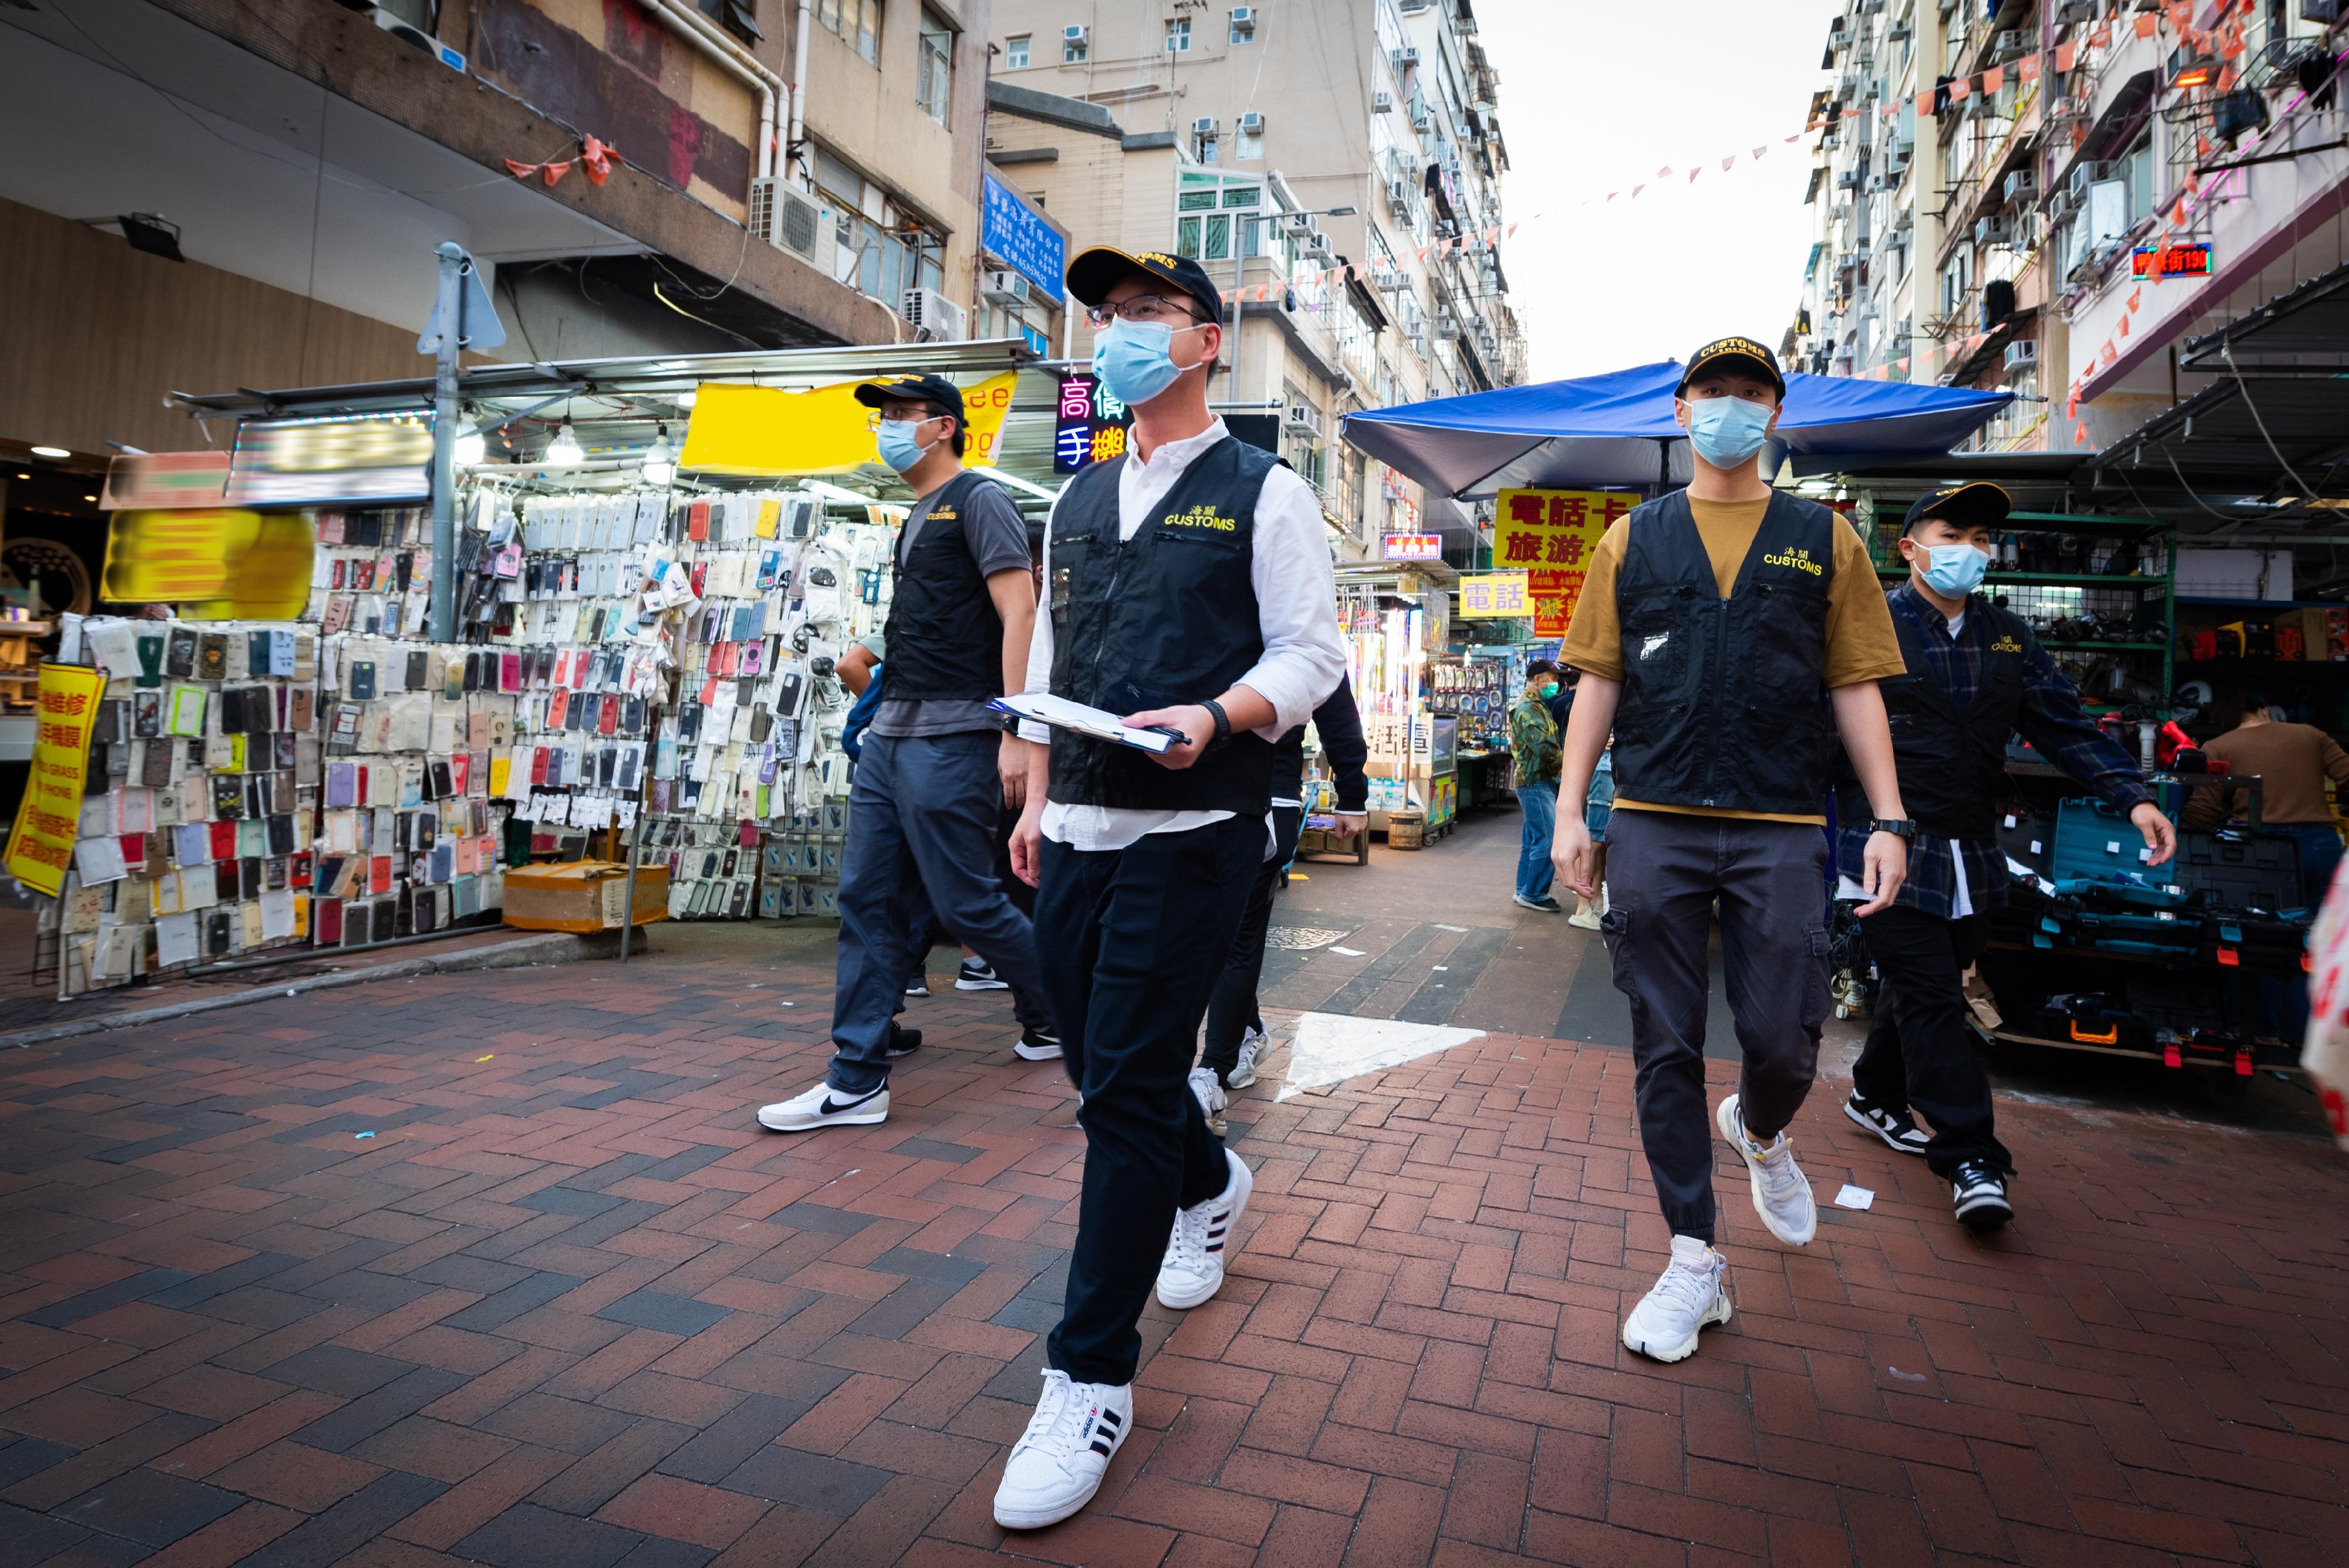 With the 2022 FIFA World Cup matches being held, Hong Kong Customs has maintained close co-operation with copyright owners and trademark owners and has stepped up patrols and enforcement on all fronts, with a view to combating criminals taking the opportunity to conduct infringement activities related to the World Cup during the period. Photo shows Customs officers conducting a spot check in the market.